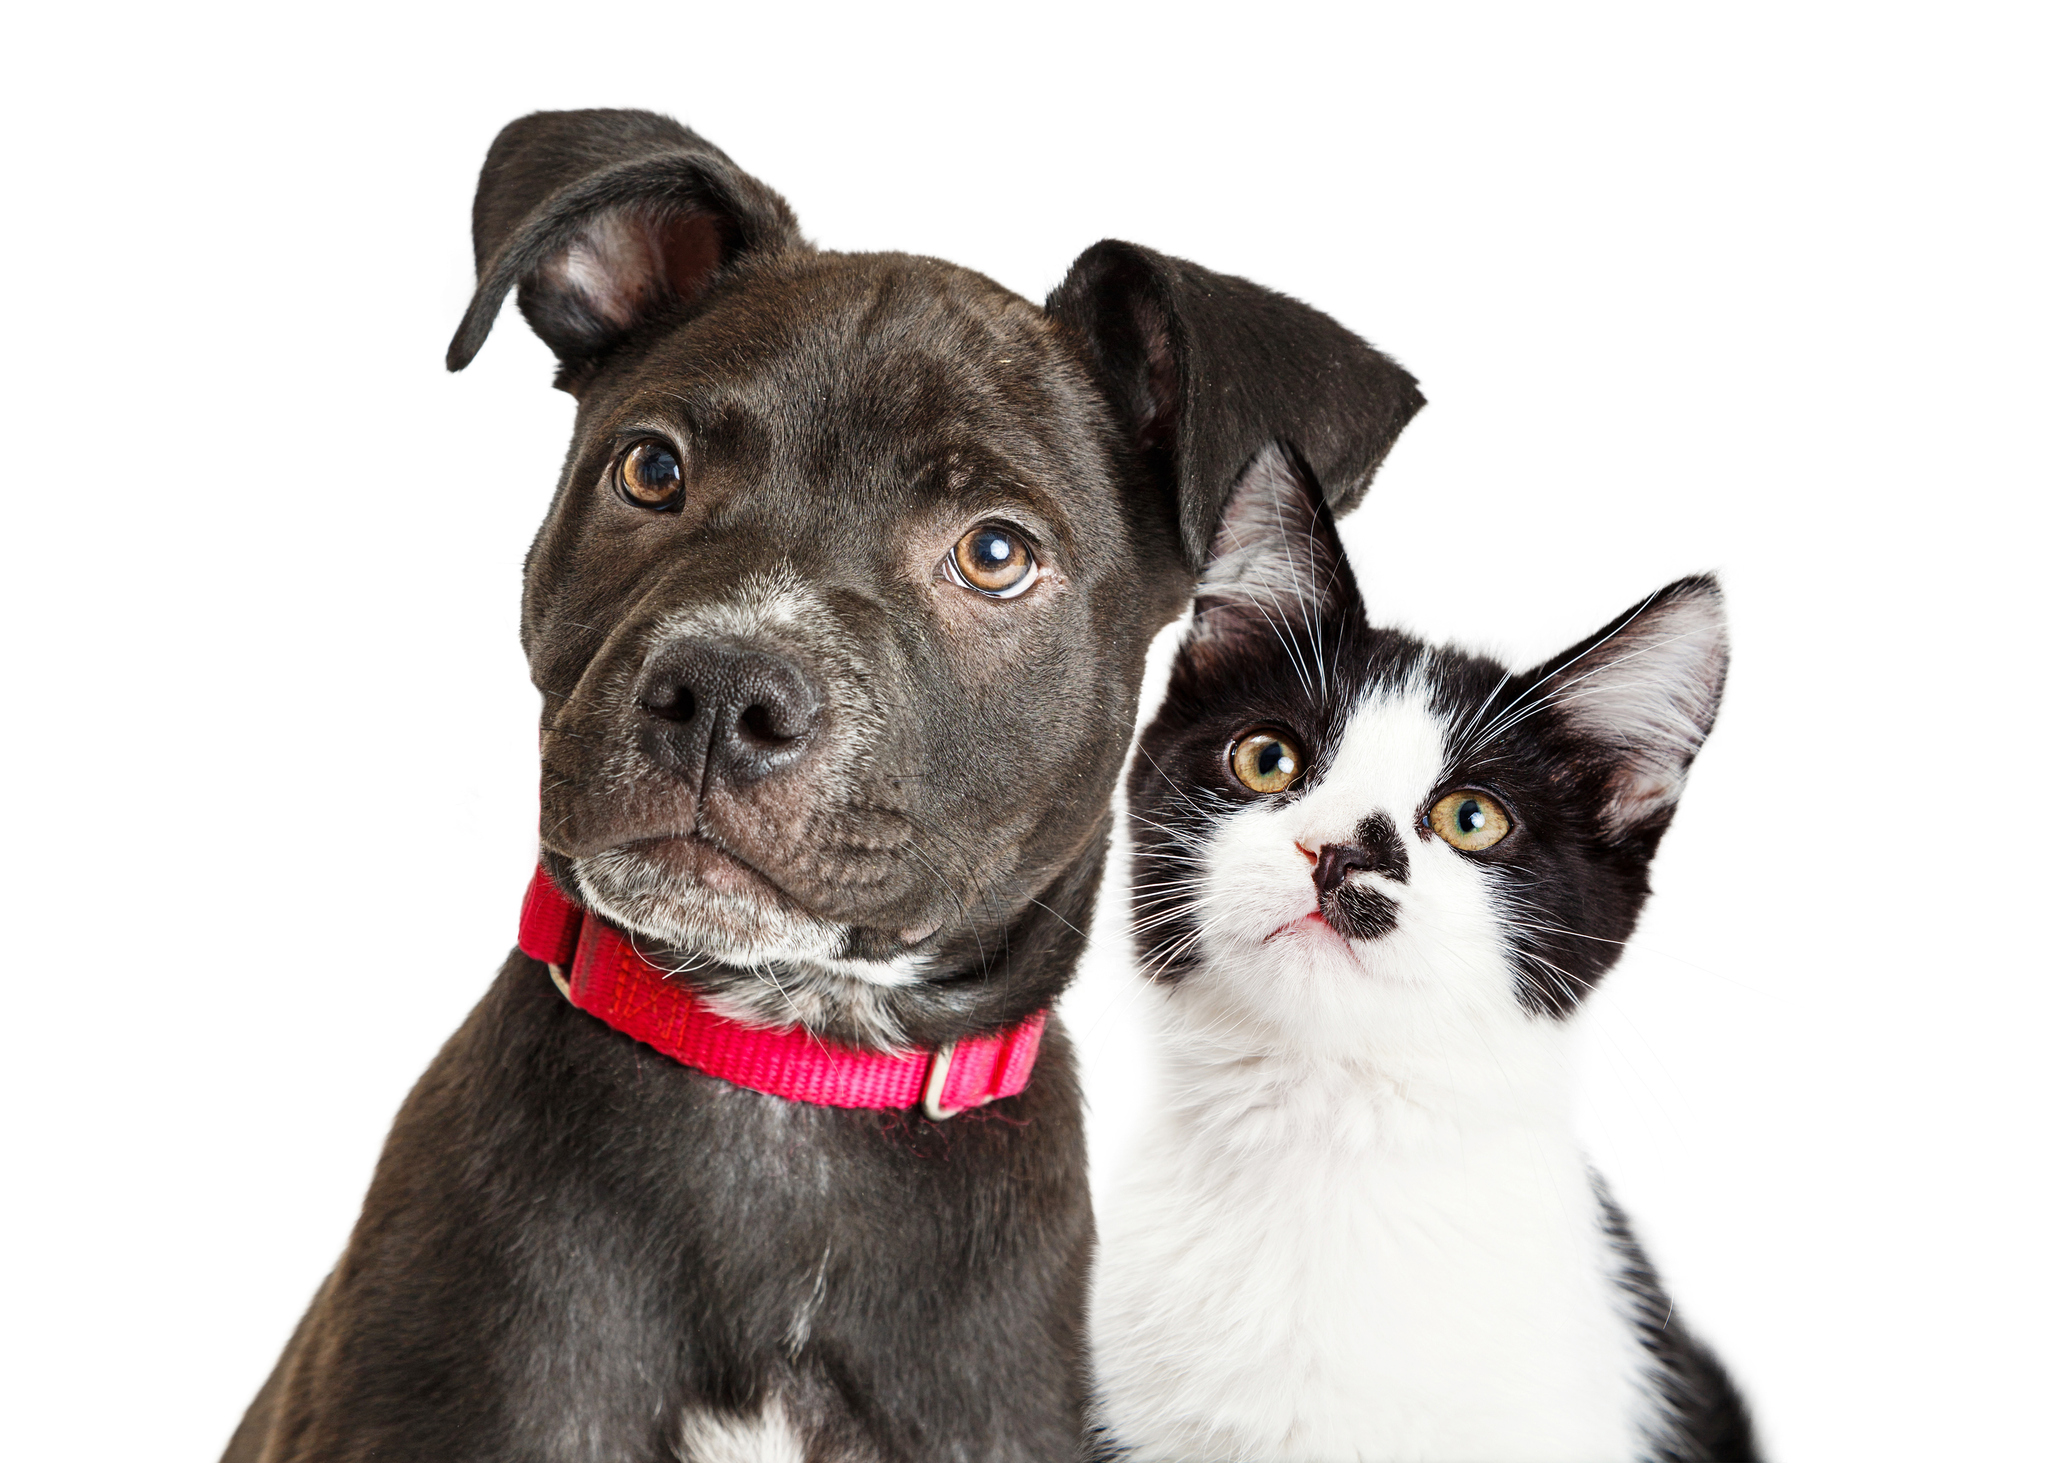 why dogs are better than cats scientifically